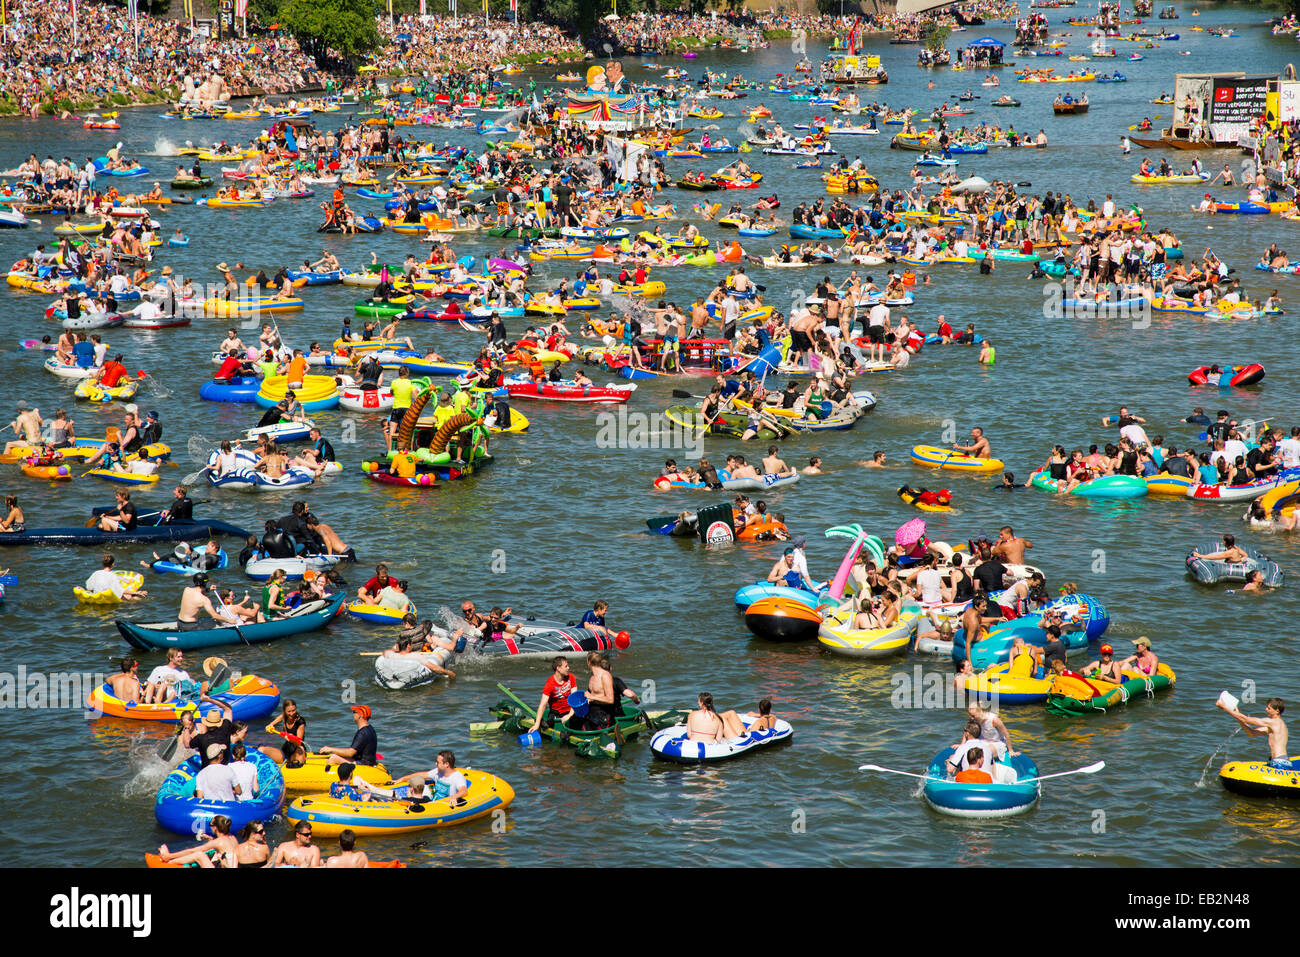 "Nabada", a traditional water parade on the Danube River on Swear Monday, Ulm, Baden-Württemberg, Germany Stock Photo